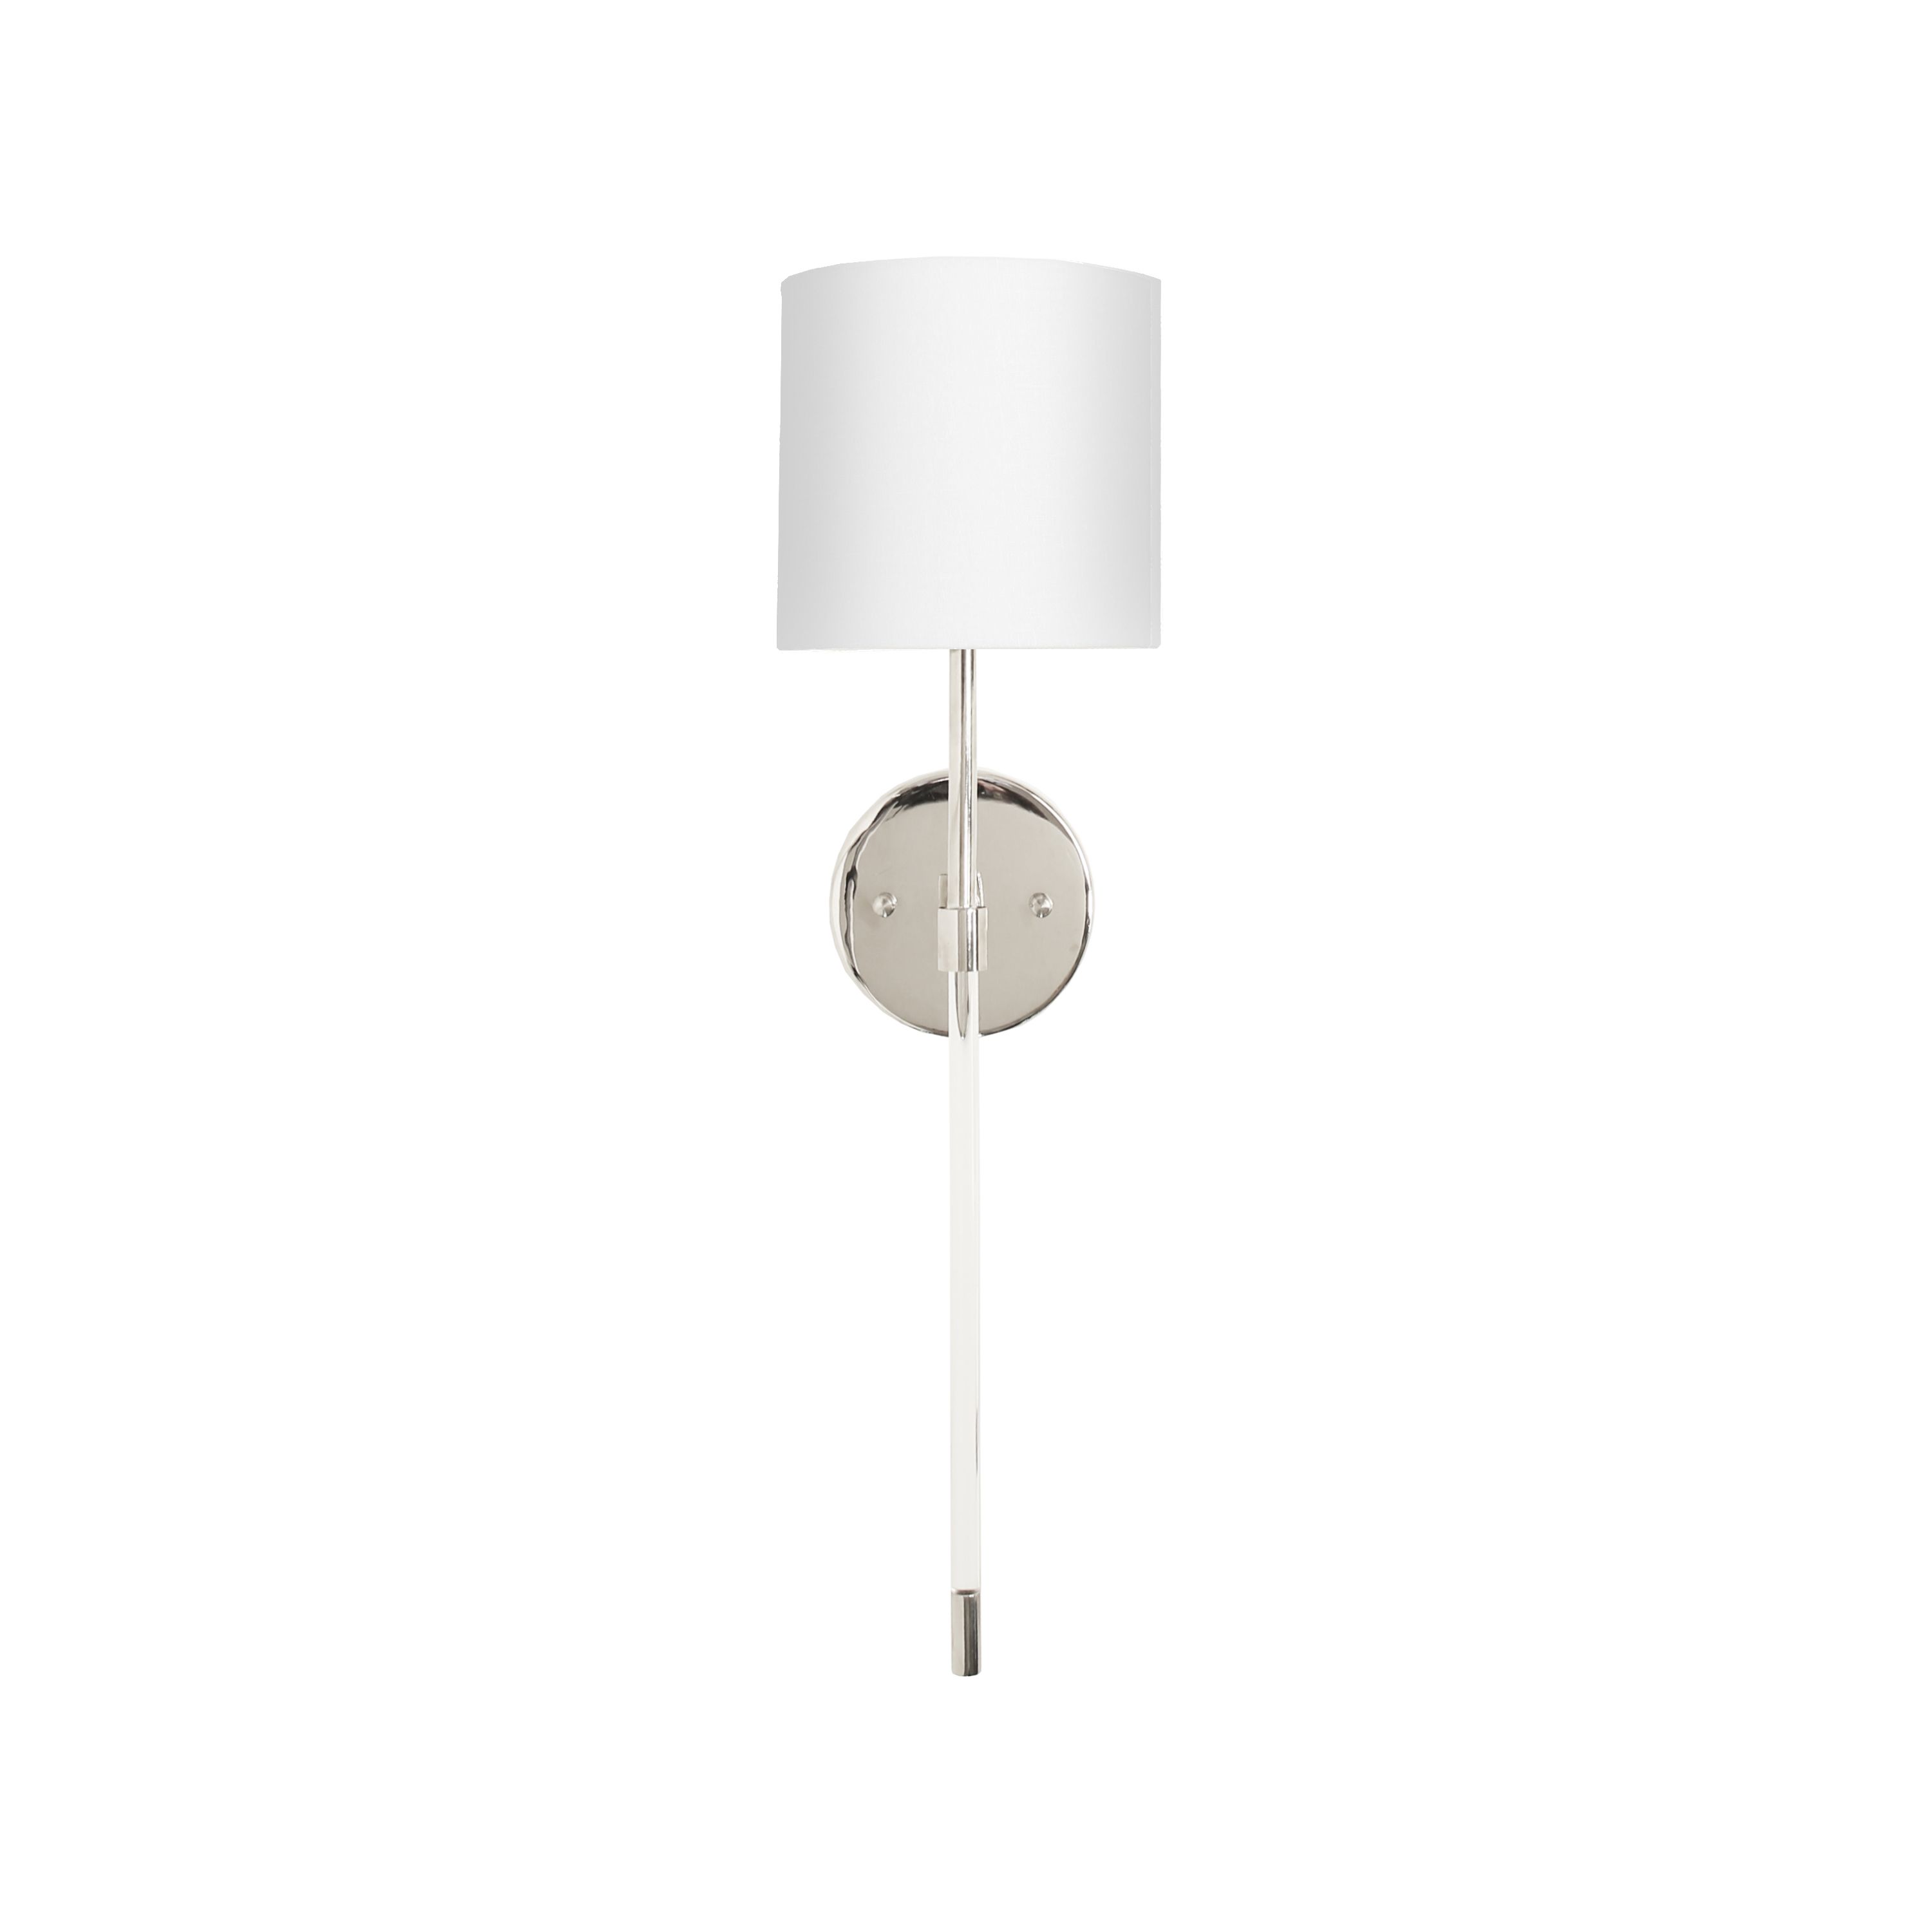 Acrylic Sconce with White Linen Shade in Nickel